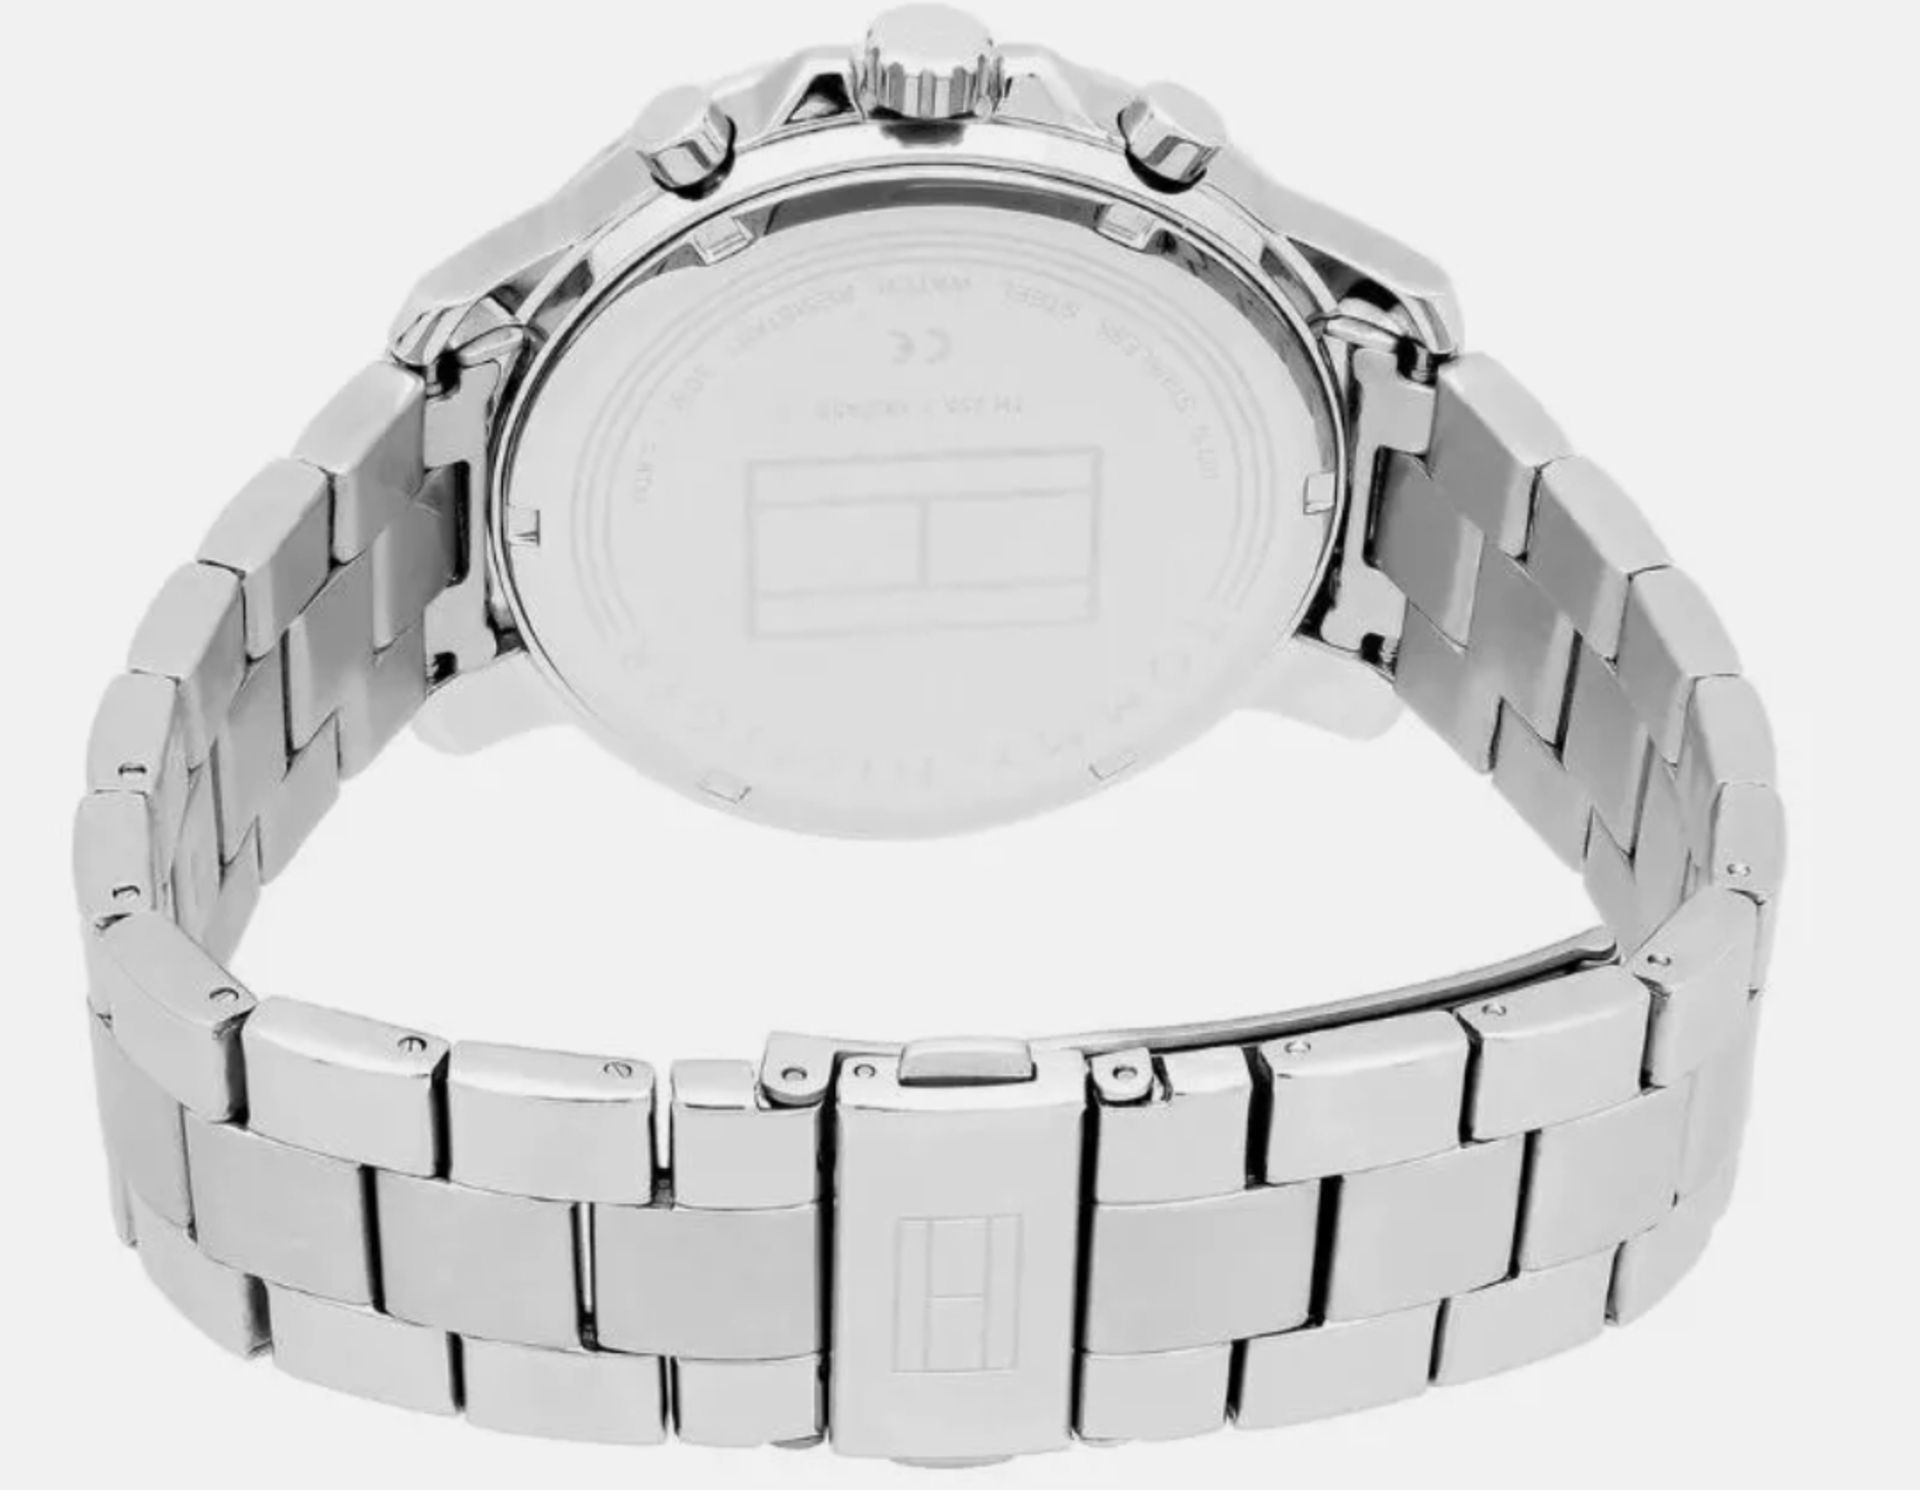 Tommy Hilfiger Men's Multi Dial Quartz Watch With Stainless Steel Strap 1791534  Tommy Hilfiger - Image 2 of 5